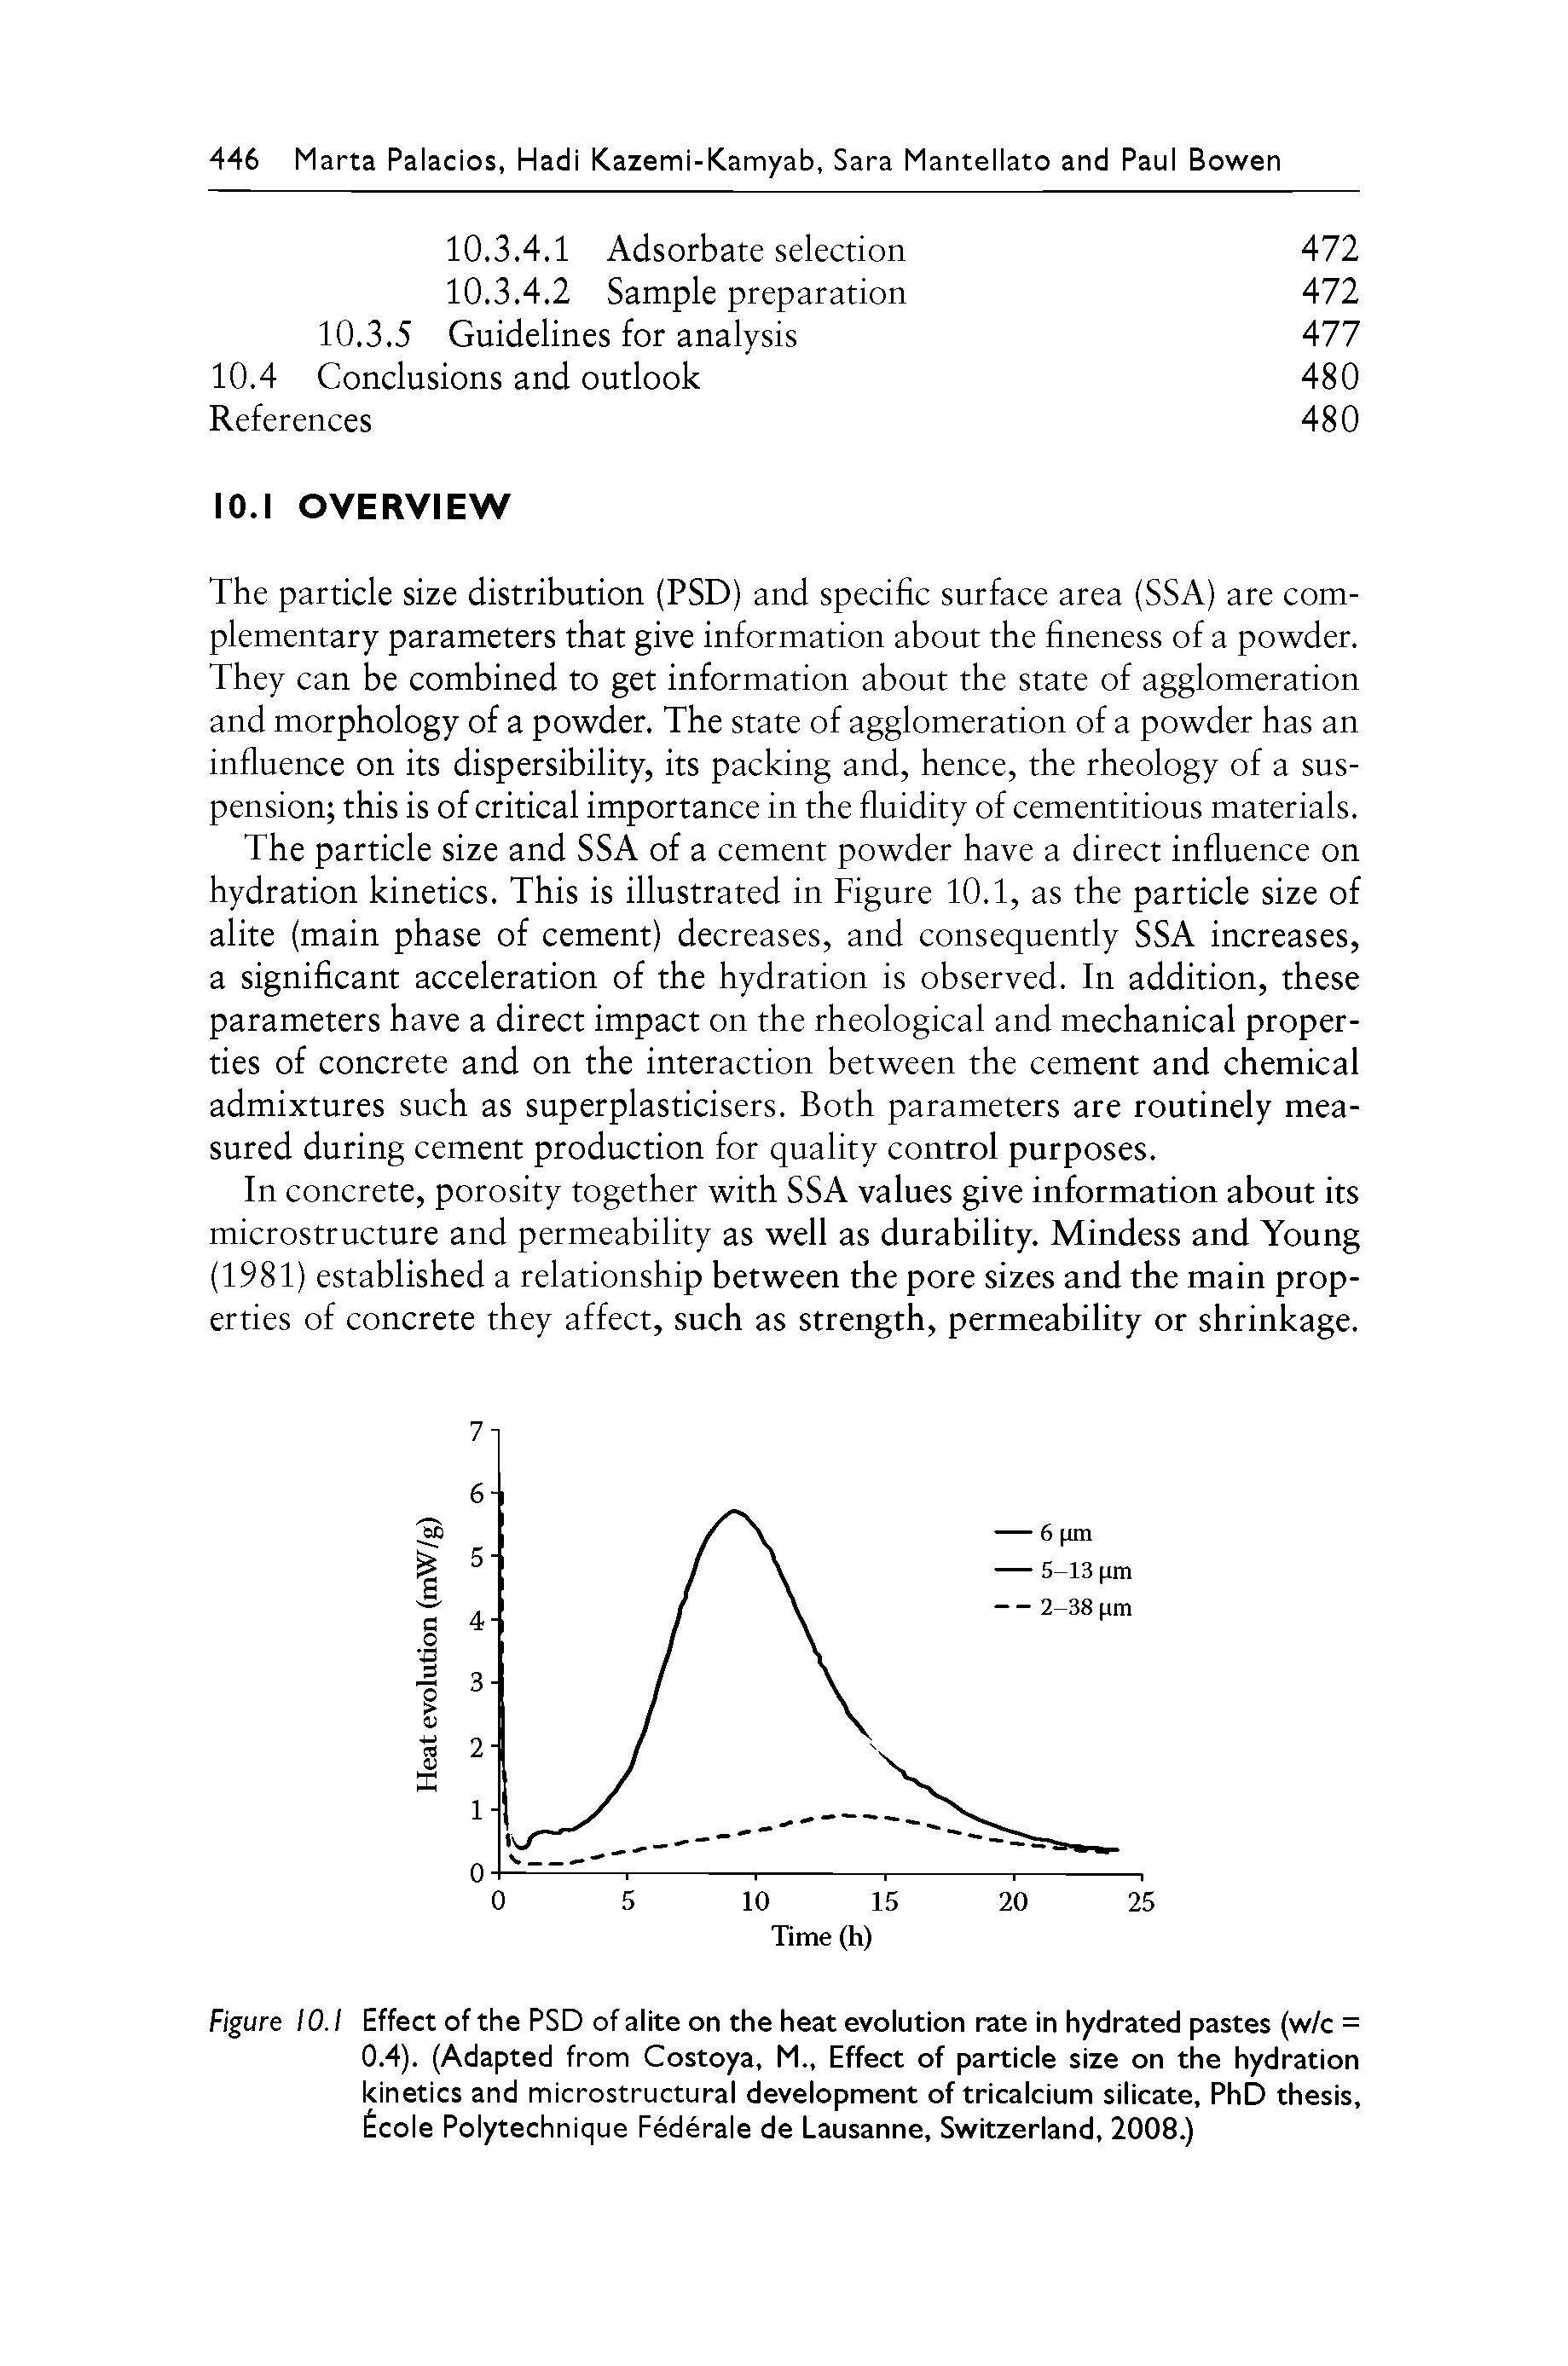 Figure 10.1 Effect of the PSD of alite on the heat evolution rate in hydrated pastes (w/c = 0.4). (Adapted from Costoya, M., Effect of particle size on the hydration kinetics and microstructural development of tricalcium silicate, PhD thesis, cole Polytechnique Federale de Lausanne, Switzerland, 2008.)...